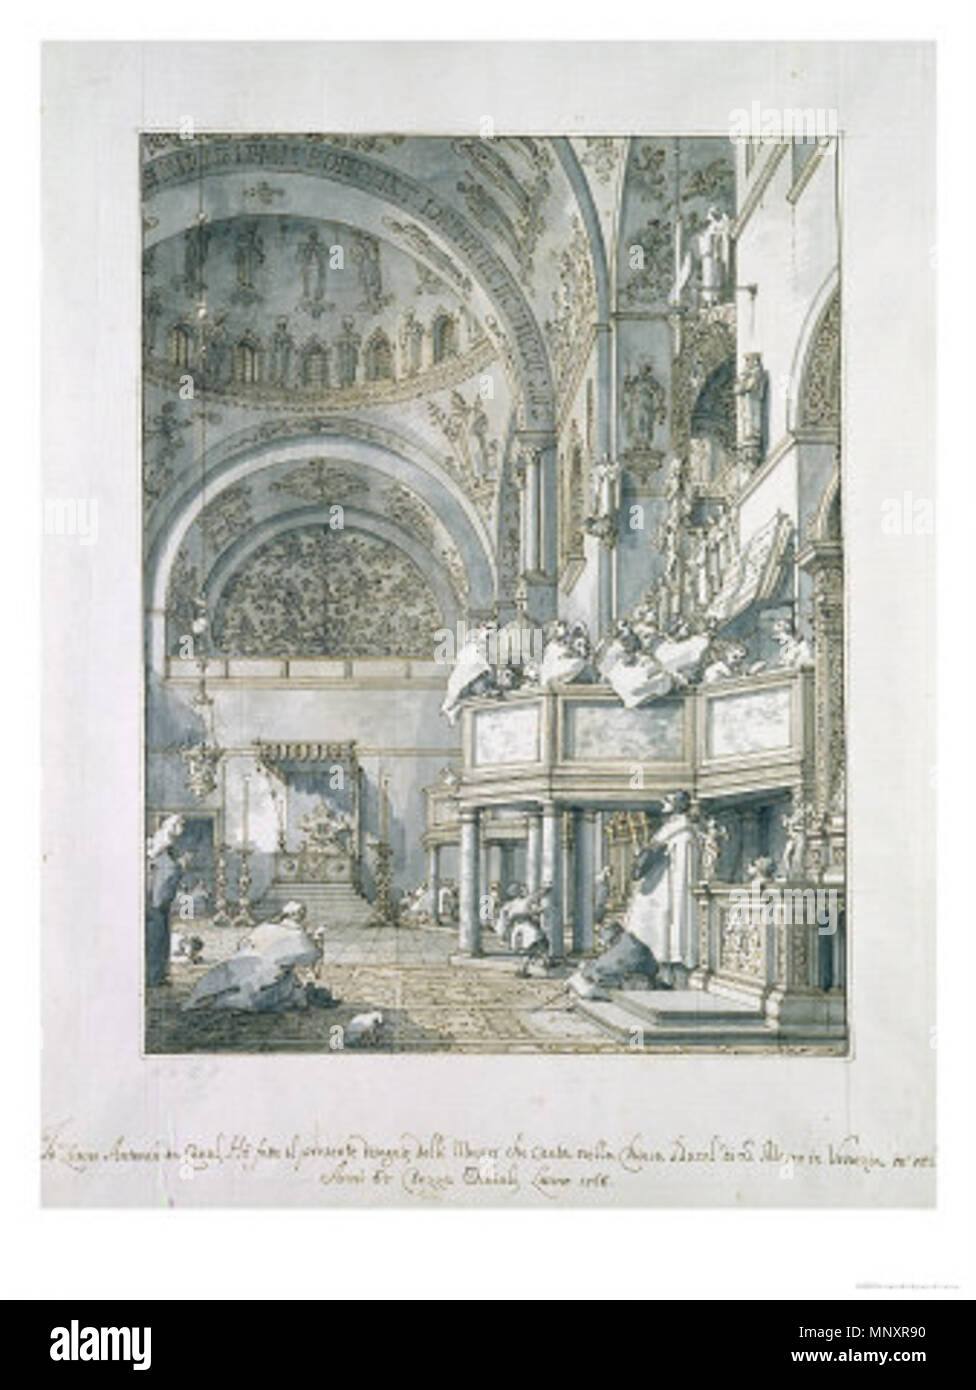 . English: The Choir Singing in St. Mark`s Basilica (Venice) . 1766.   Canaletto  (1697–1768)      Alternative names Birth name: Giovanni Antonio Canal pseudonym: Il Canaletto  Description Italian painter, draughtsman and etcher  Date of birth/death 17 October 1697 10 April 1768  Location of birth/death Venice Venice  Work period from 1716 until 1768  Work location Venice (1716–1719), Rome (1719), Vienna, Dresden, Venice (1720–1746), London (circa 1746–1756), Venice (circa 1756–1768)  Authority control  : Q182664 VIAF: 88652637 ISNI: 0000 0001 2142 8397 ULAN: 500115269 LCCN: n79065963 NLA: 362 Stock Photo